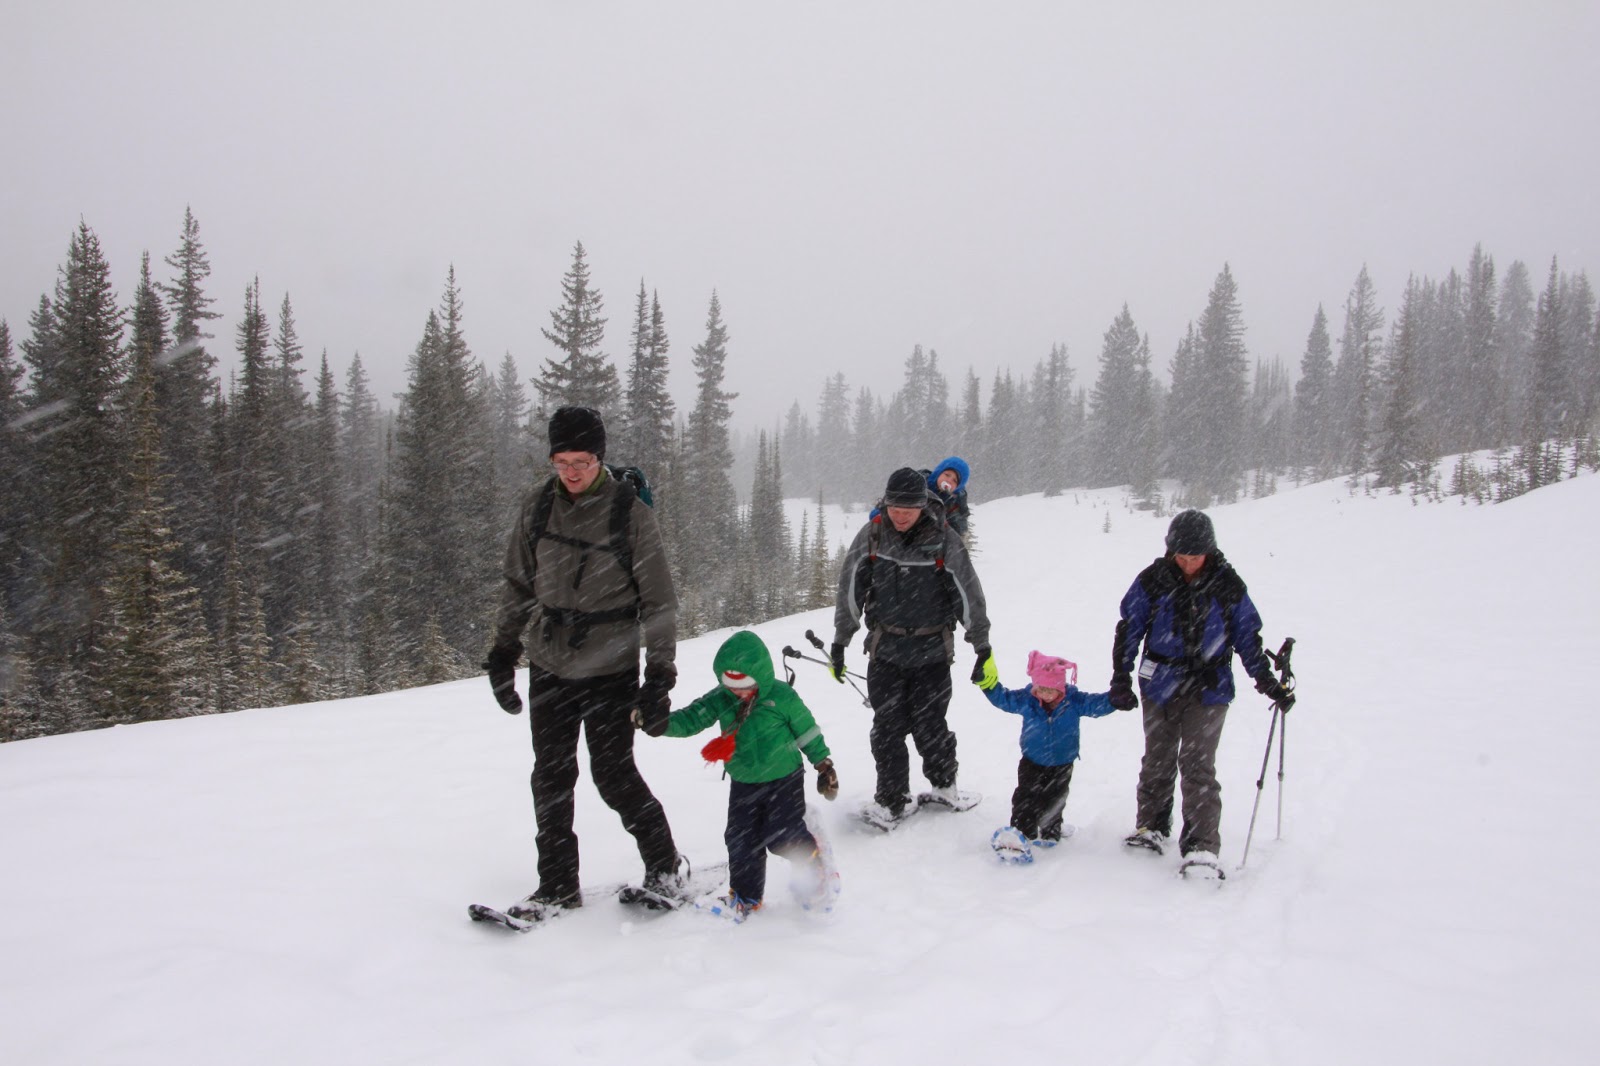 Snowshoeing with the family